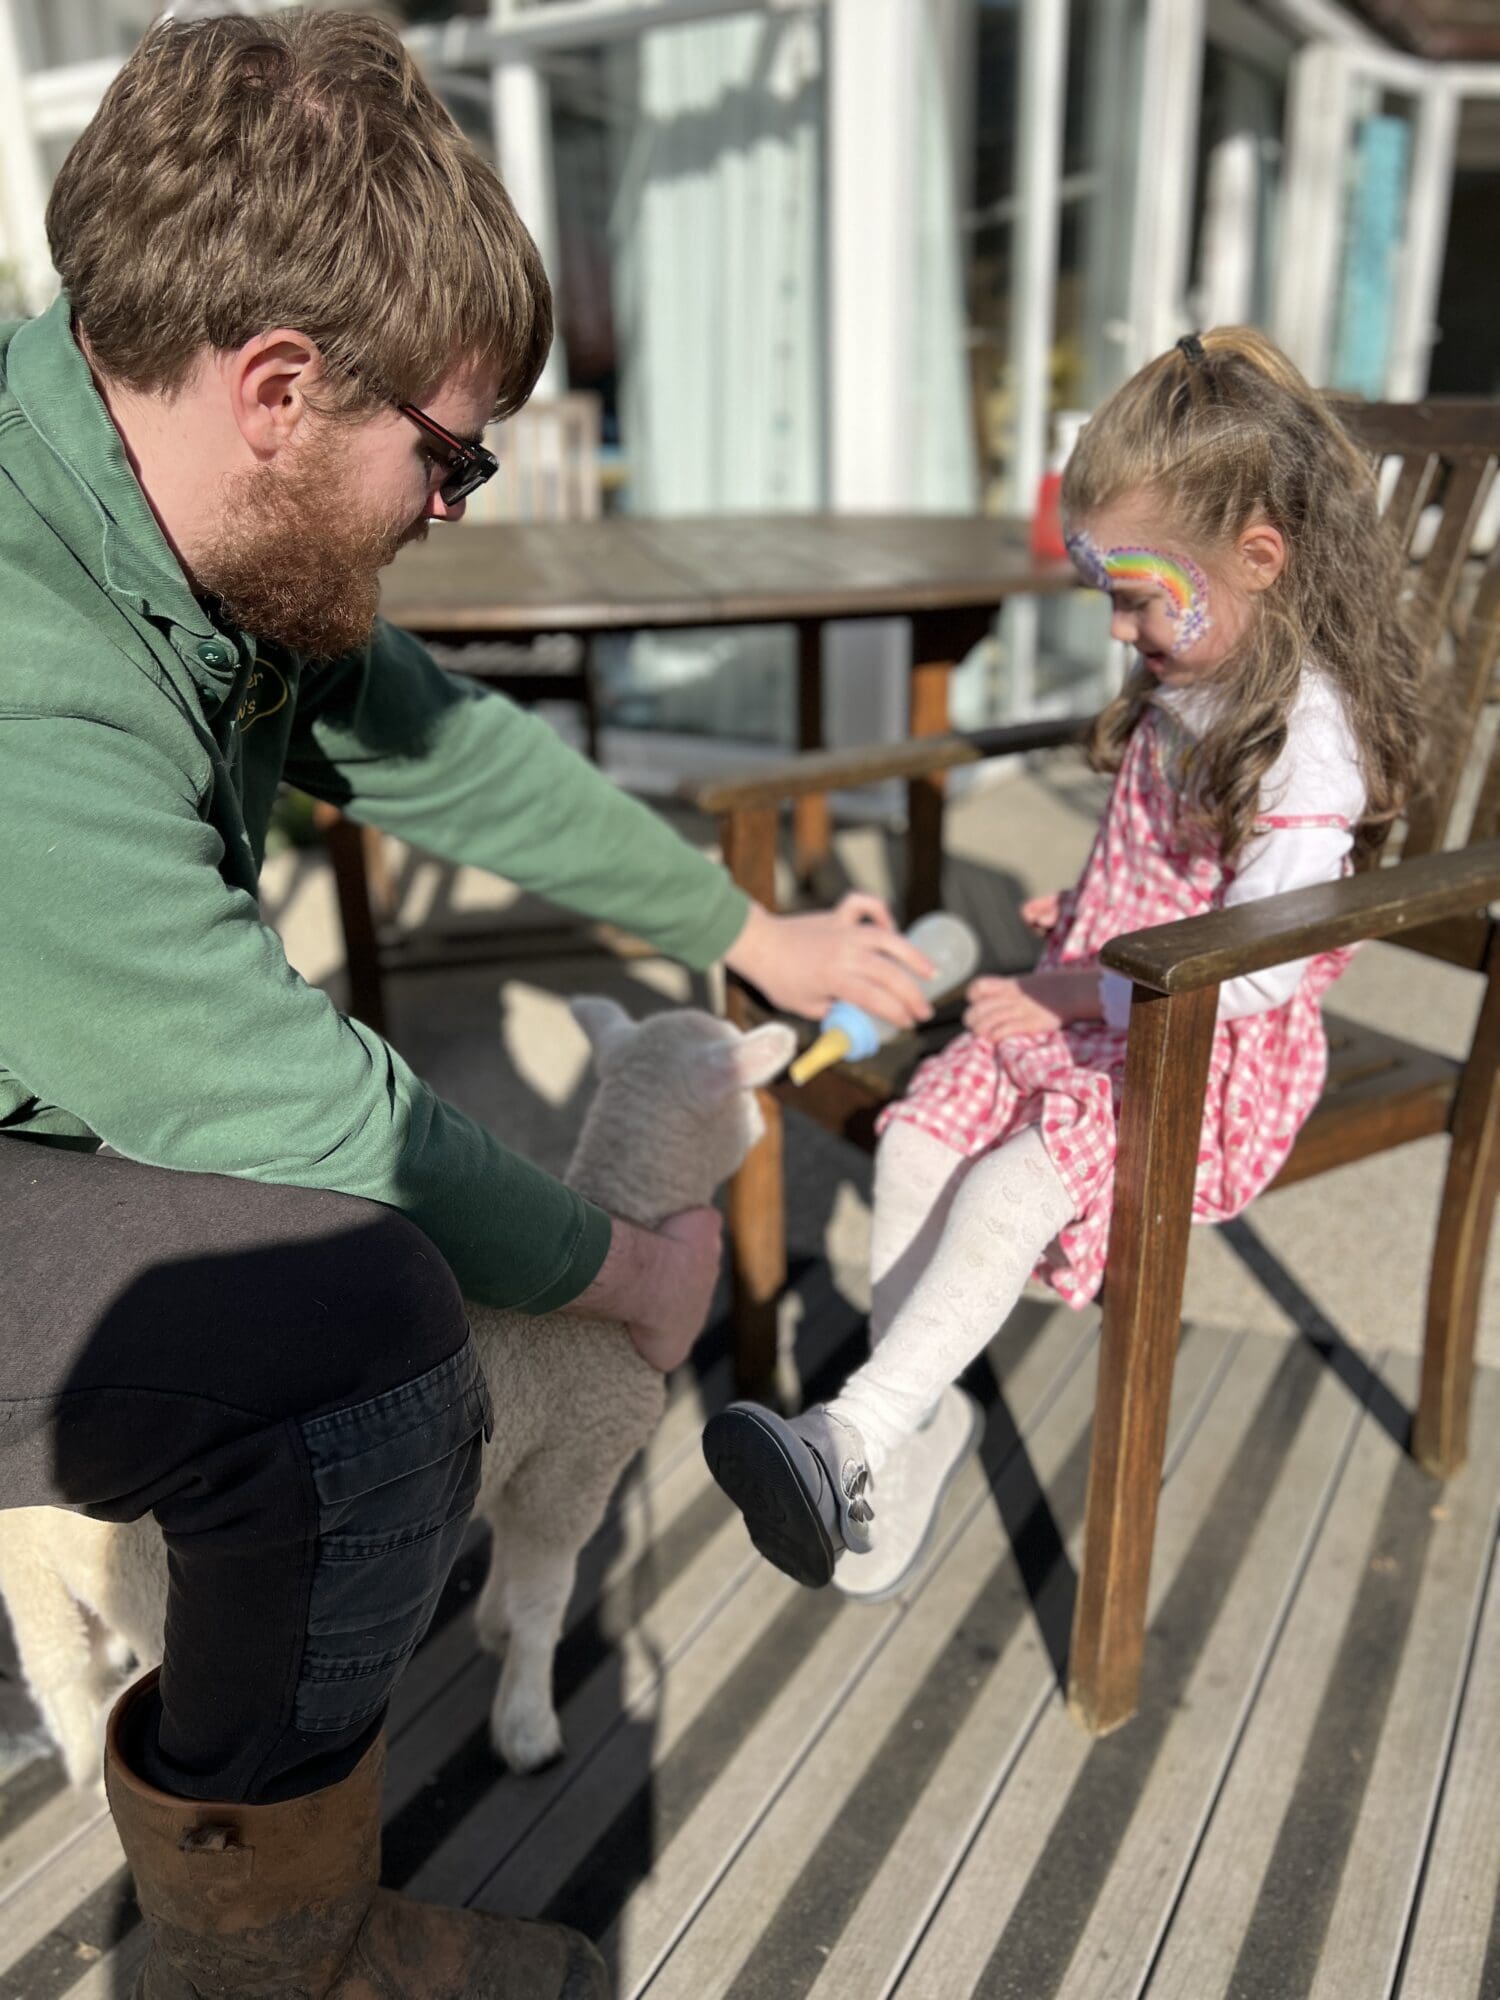 a little girl feeding a lamb sat down with a man in a green top